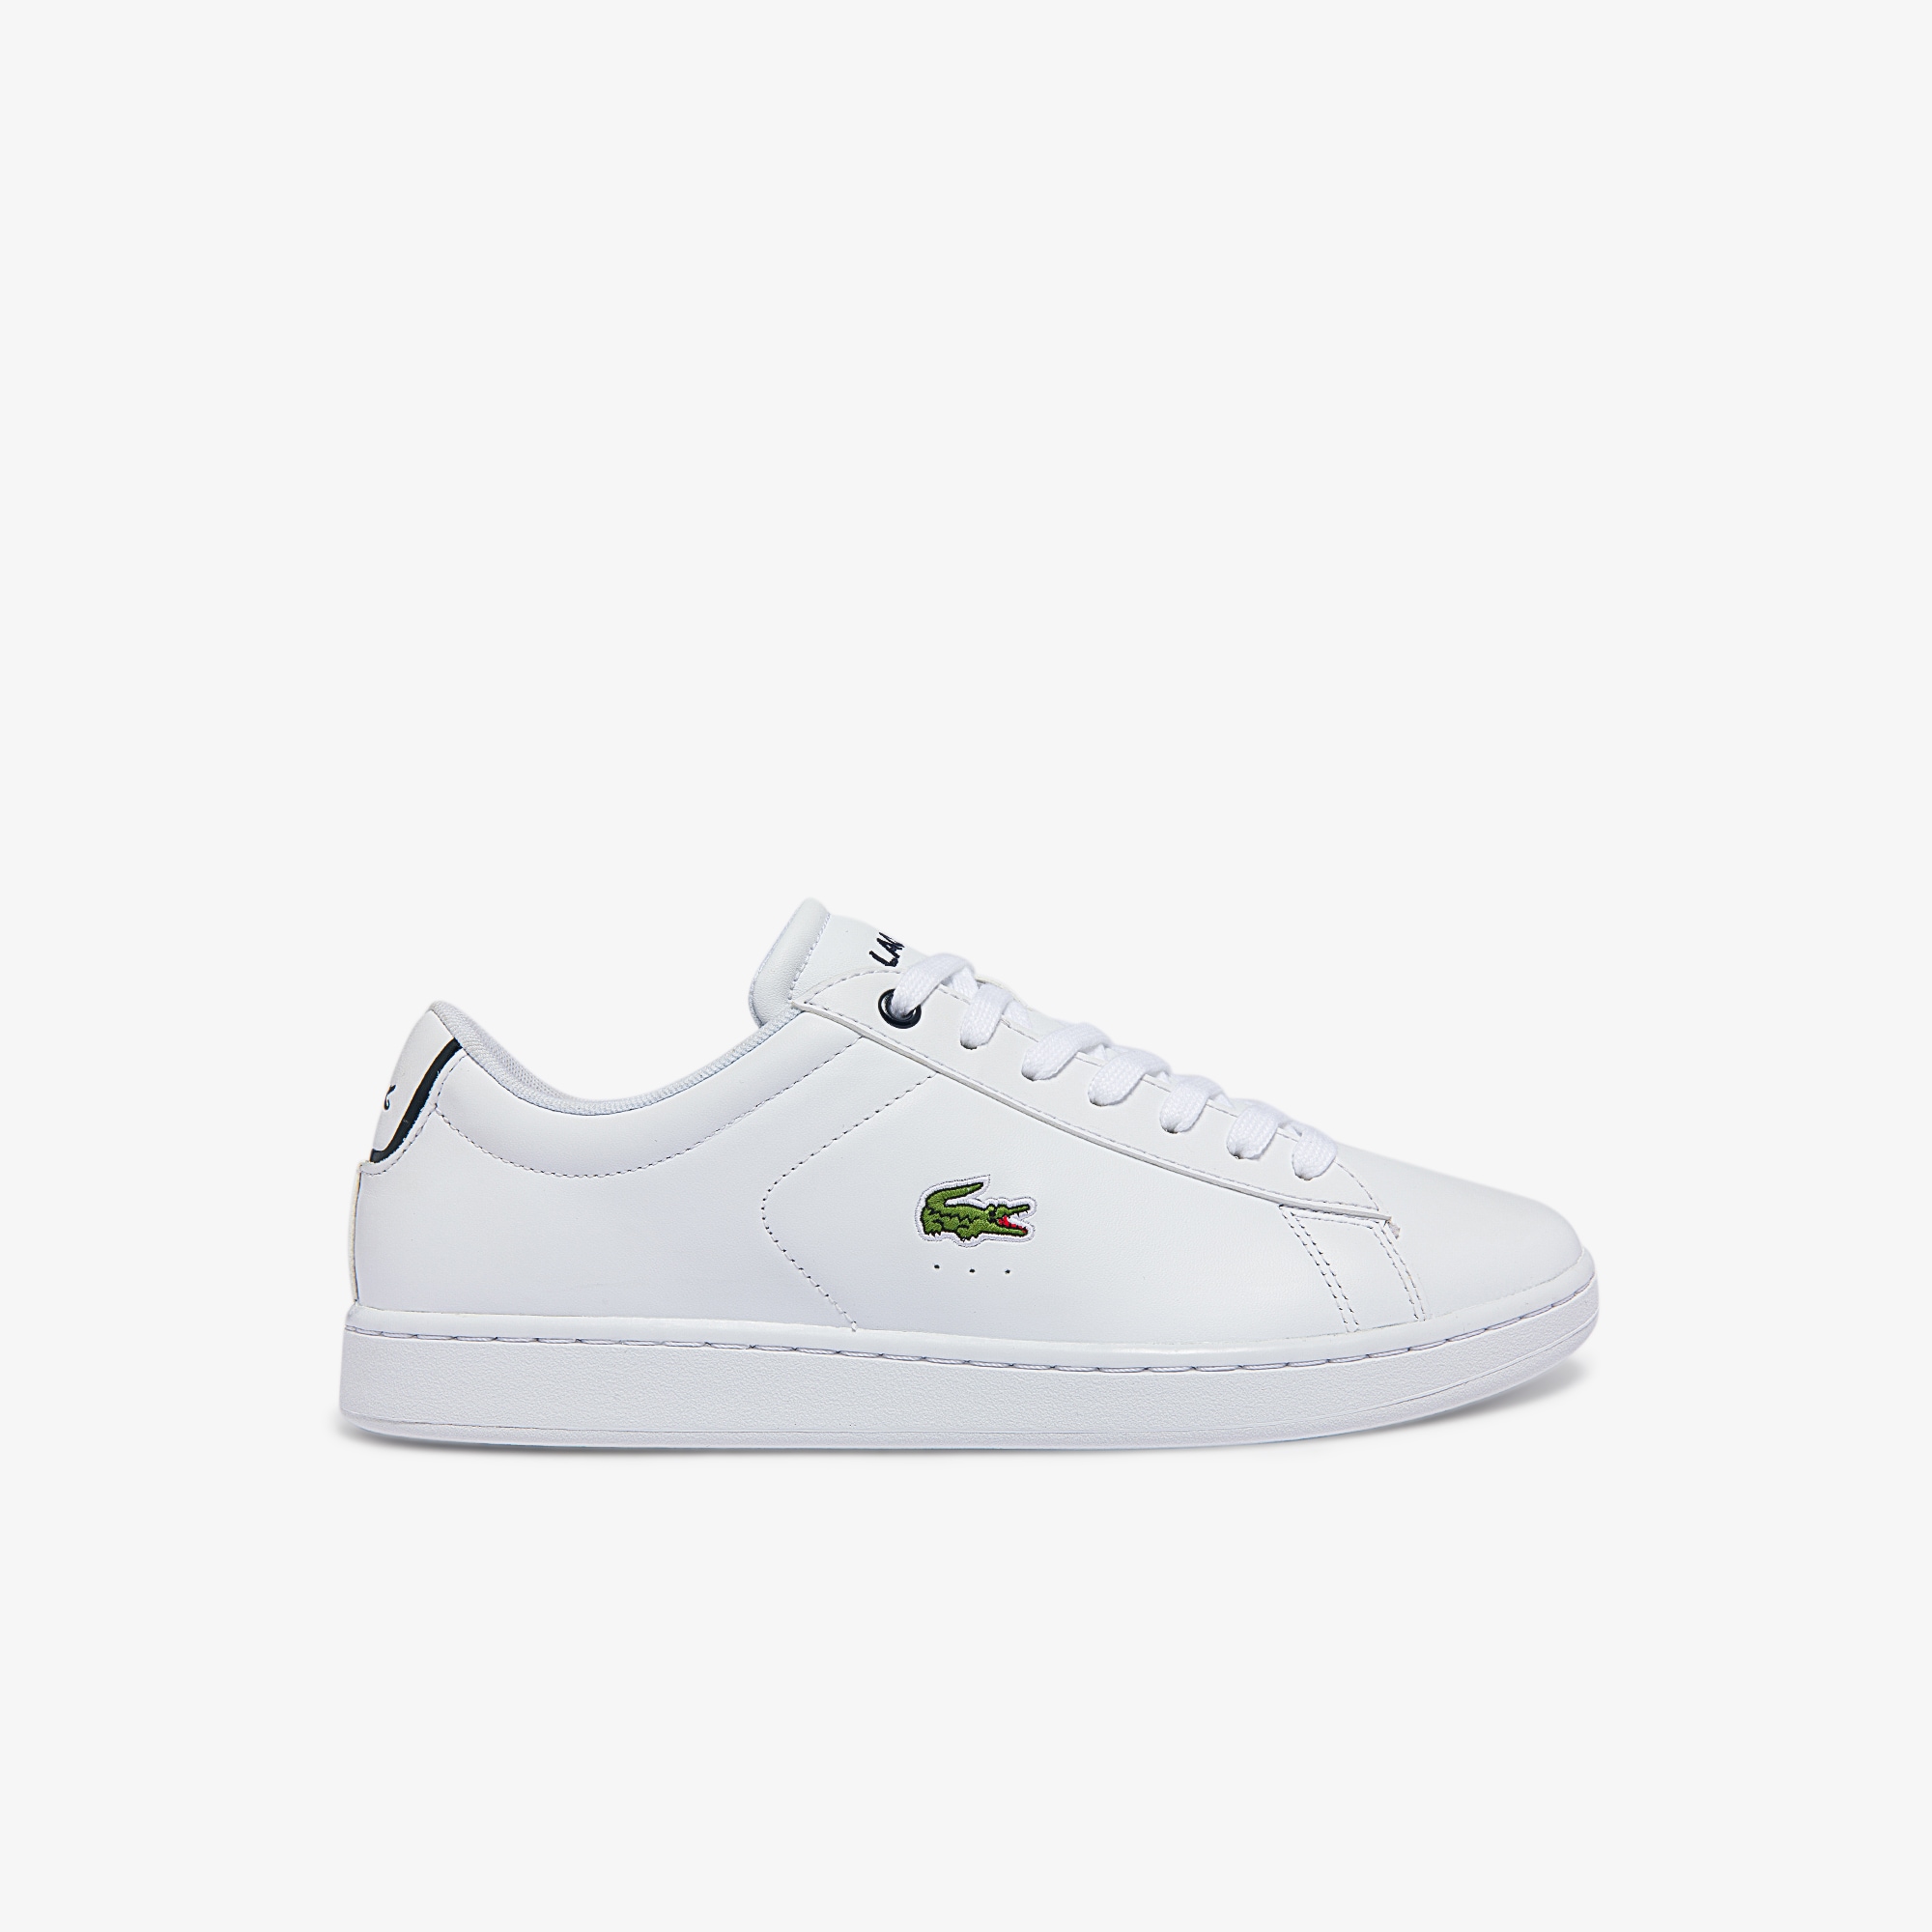 Lacoste Men's Carnaby BL Leather Trainers Size 8 UK White & Navy